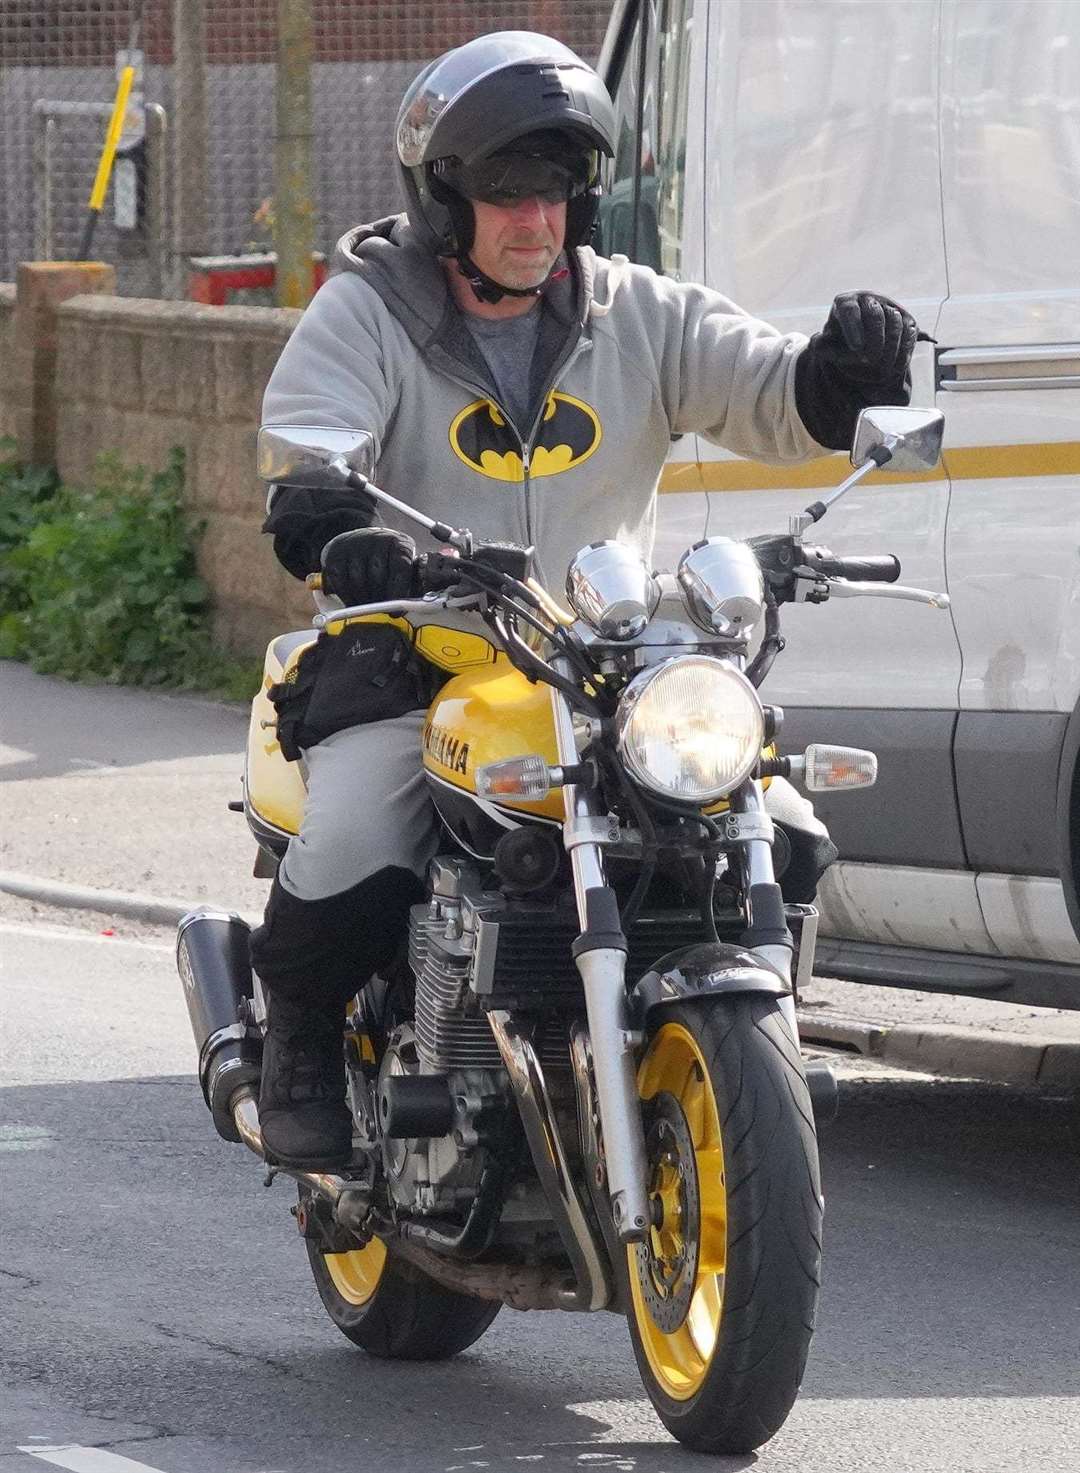 Even Batman took part in the Associated Sheppey Bikers' Easter egg run on Sunday. Picture: John Stockham